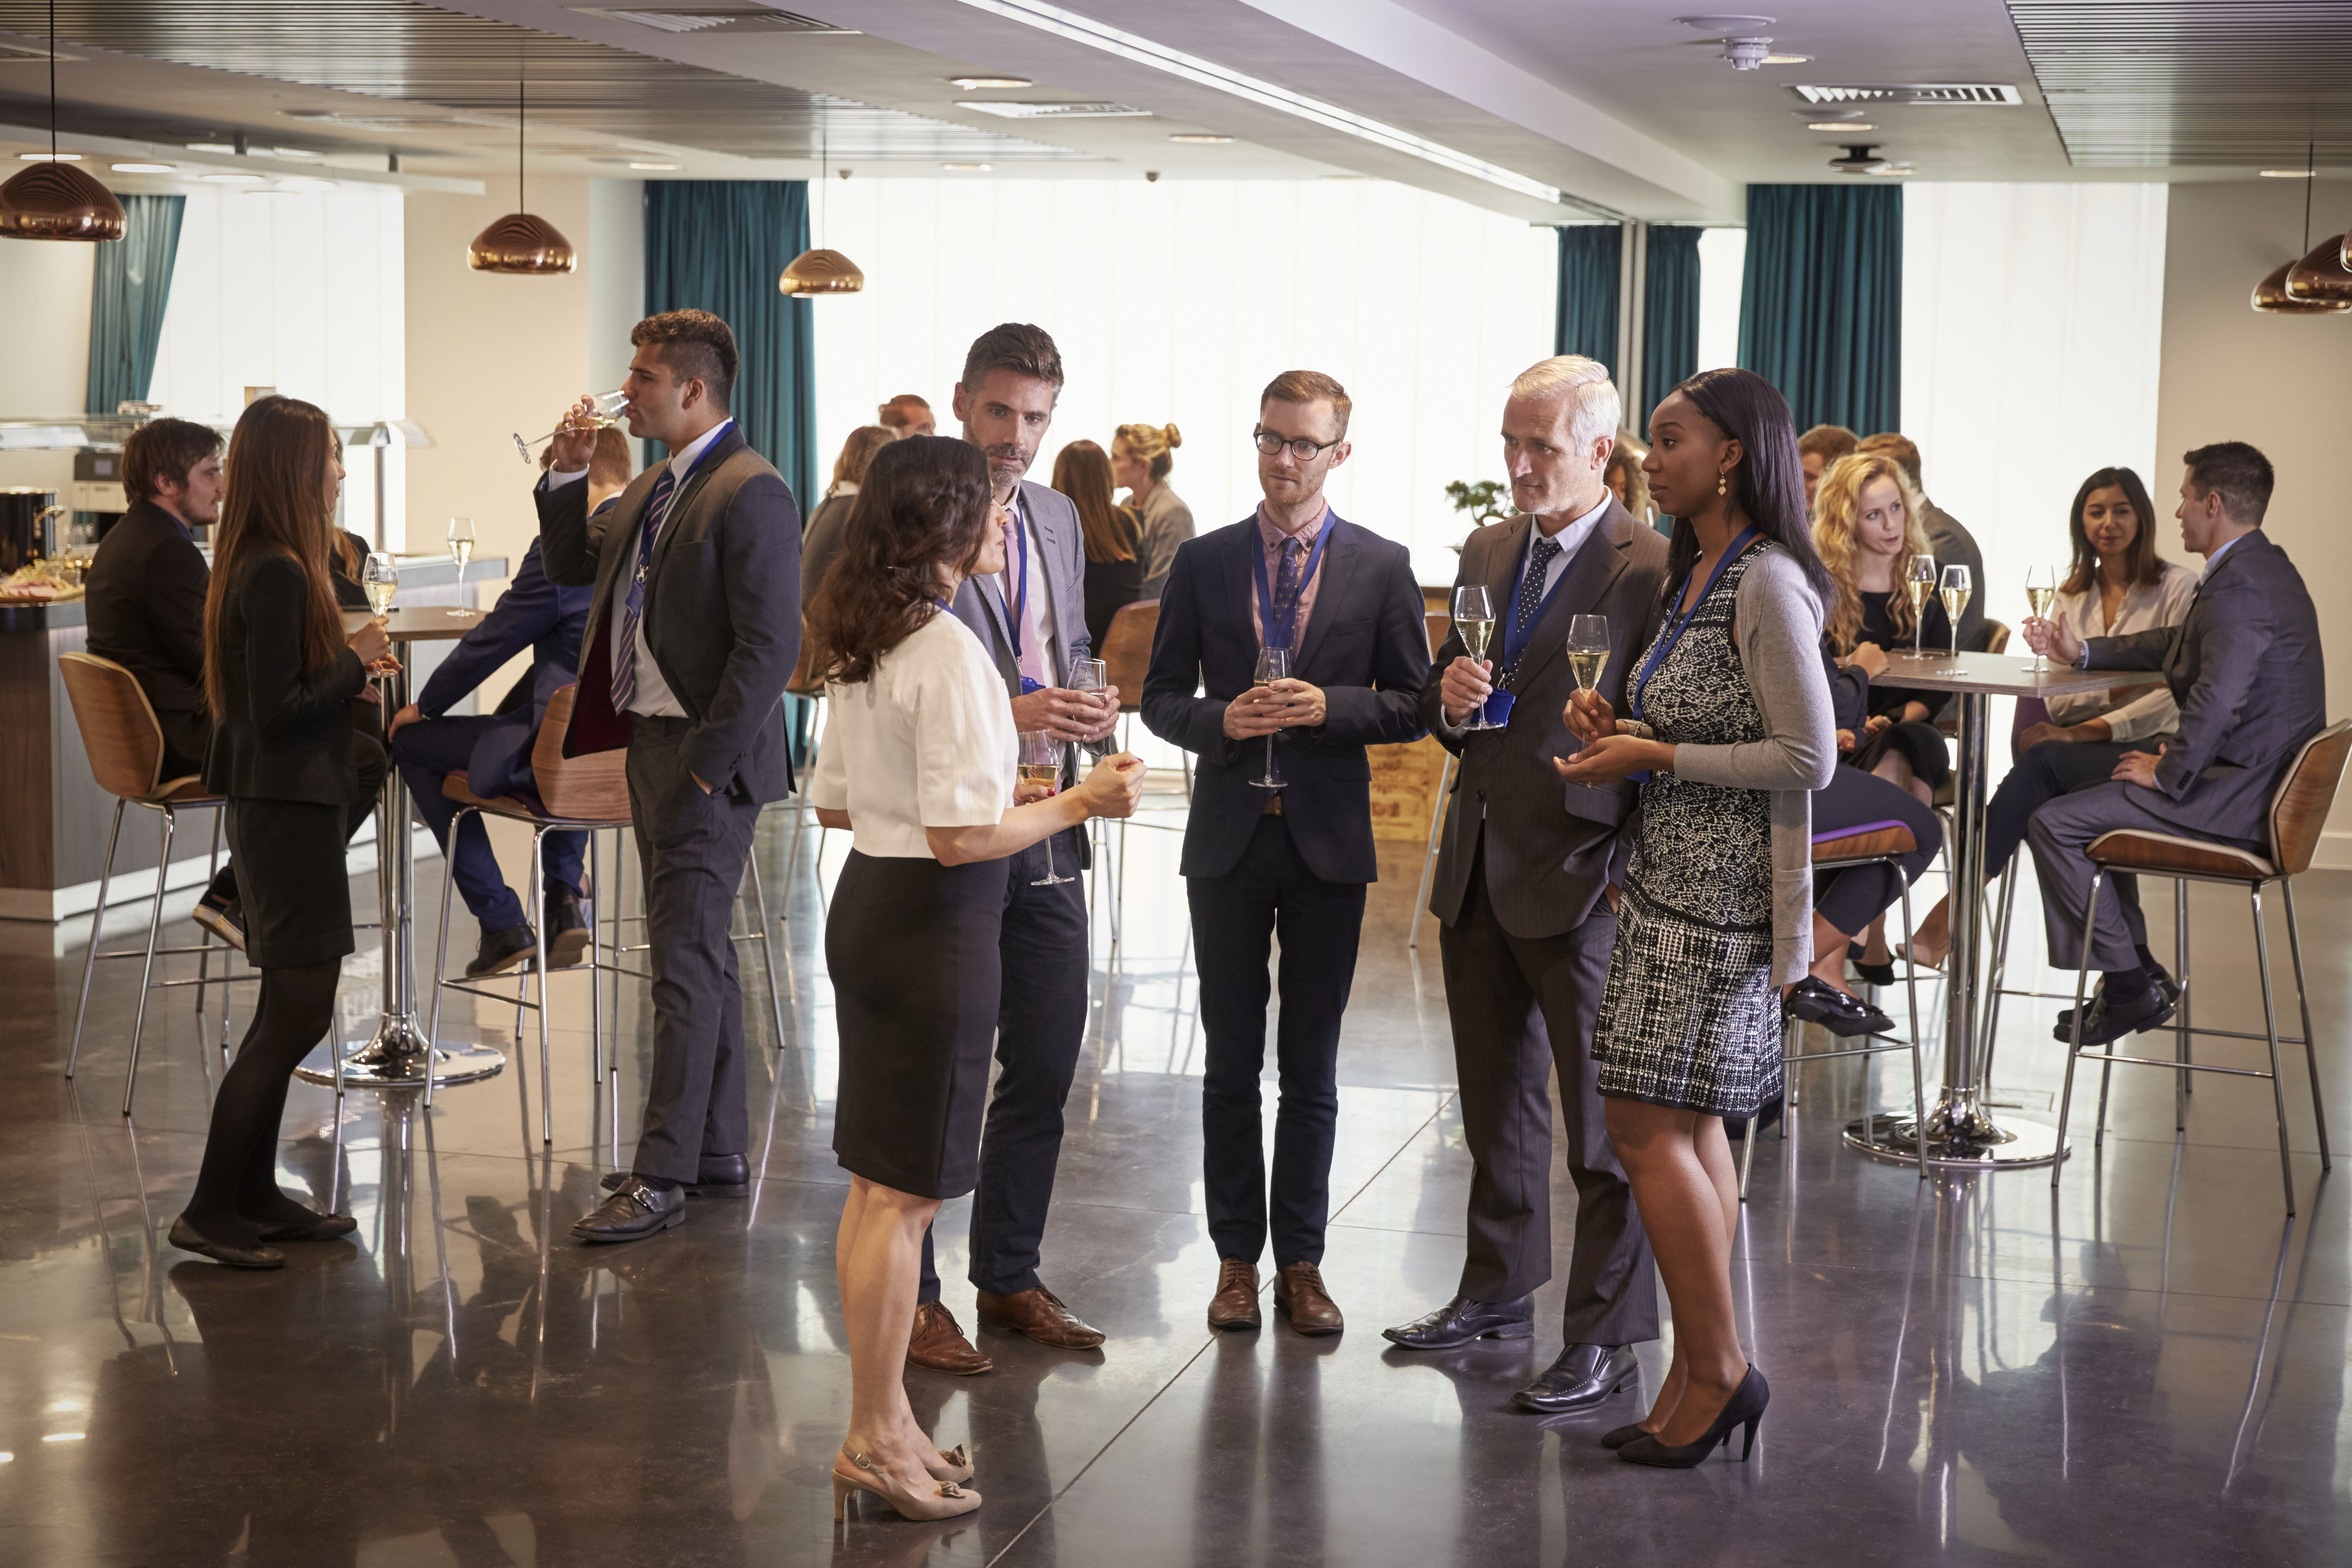 6 Tips to Make Networking Events Less Intimidating Texas Exes